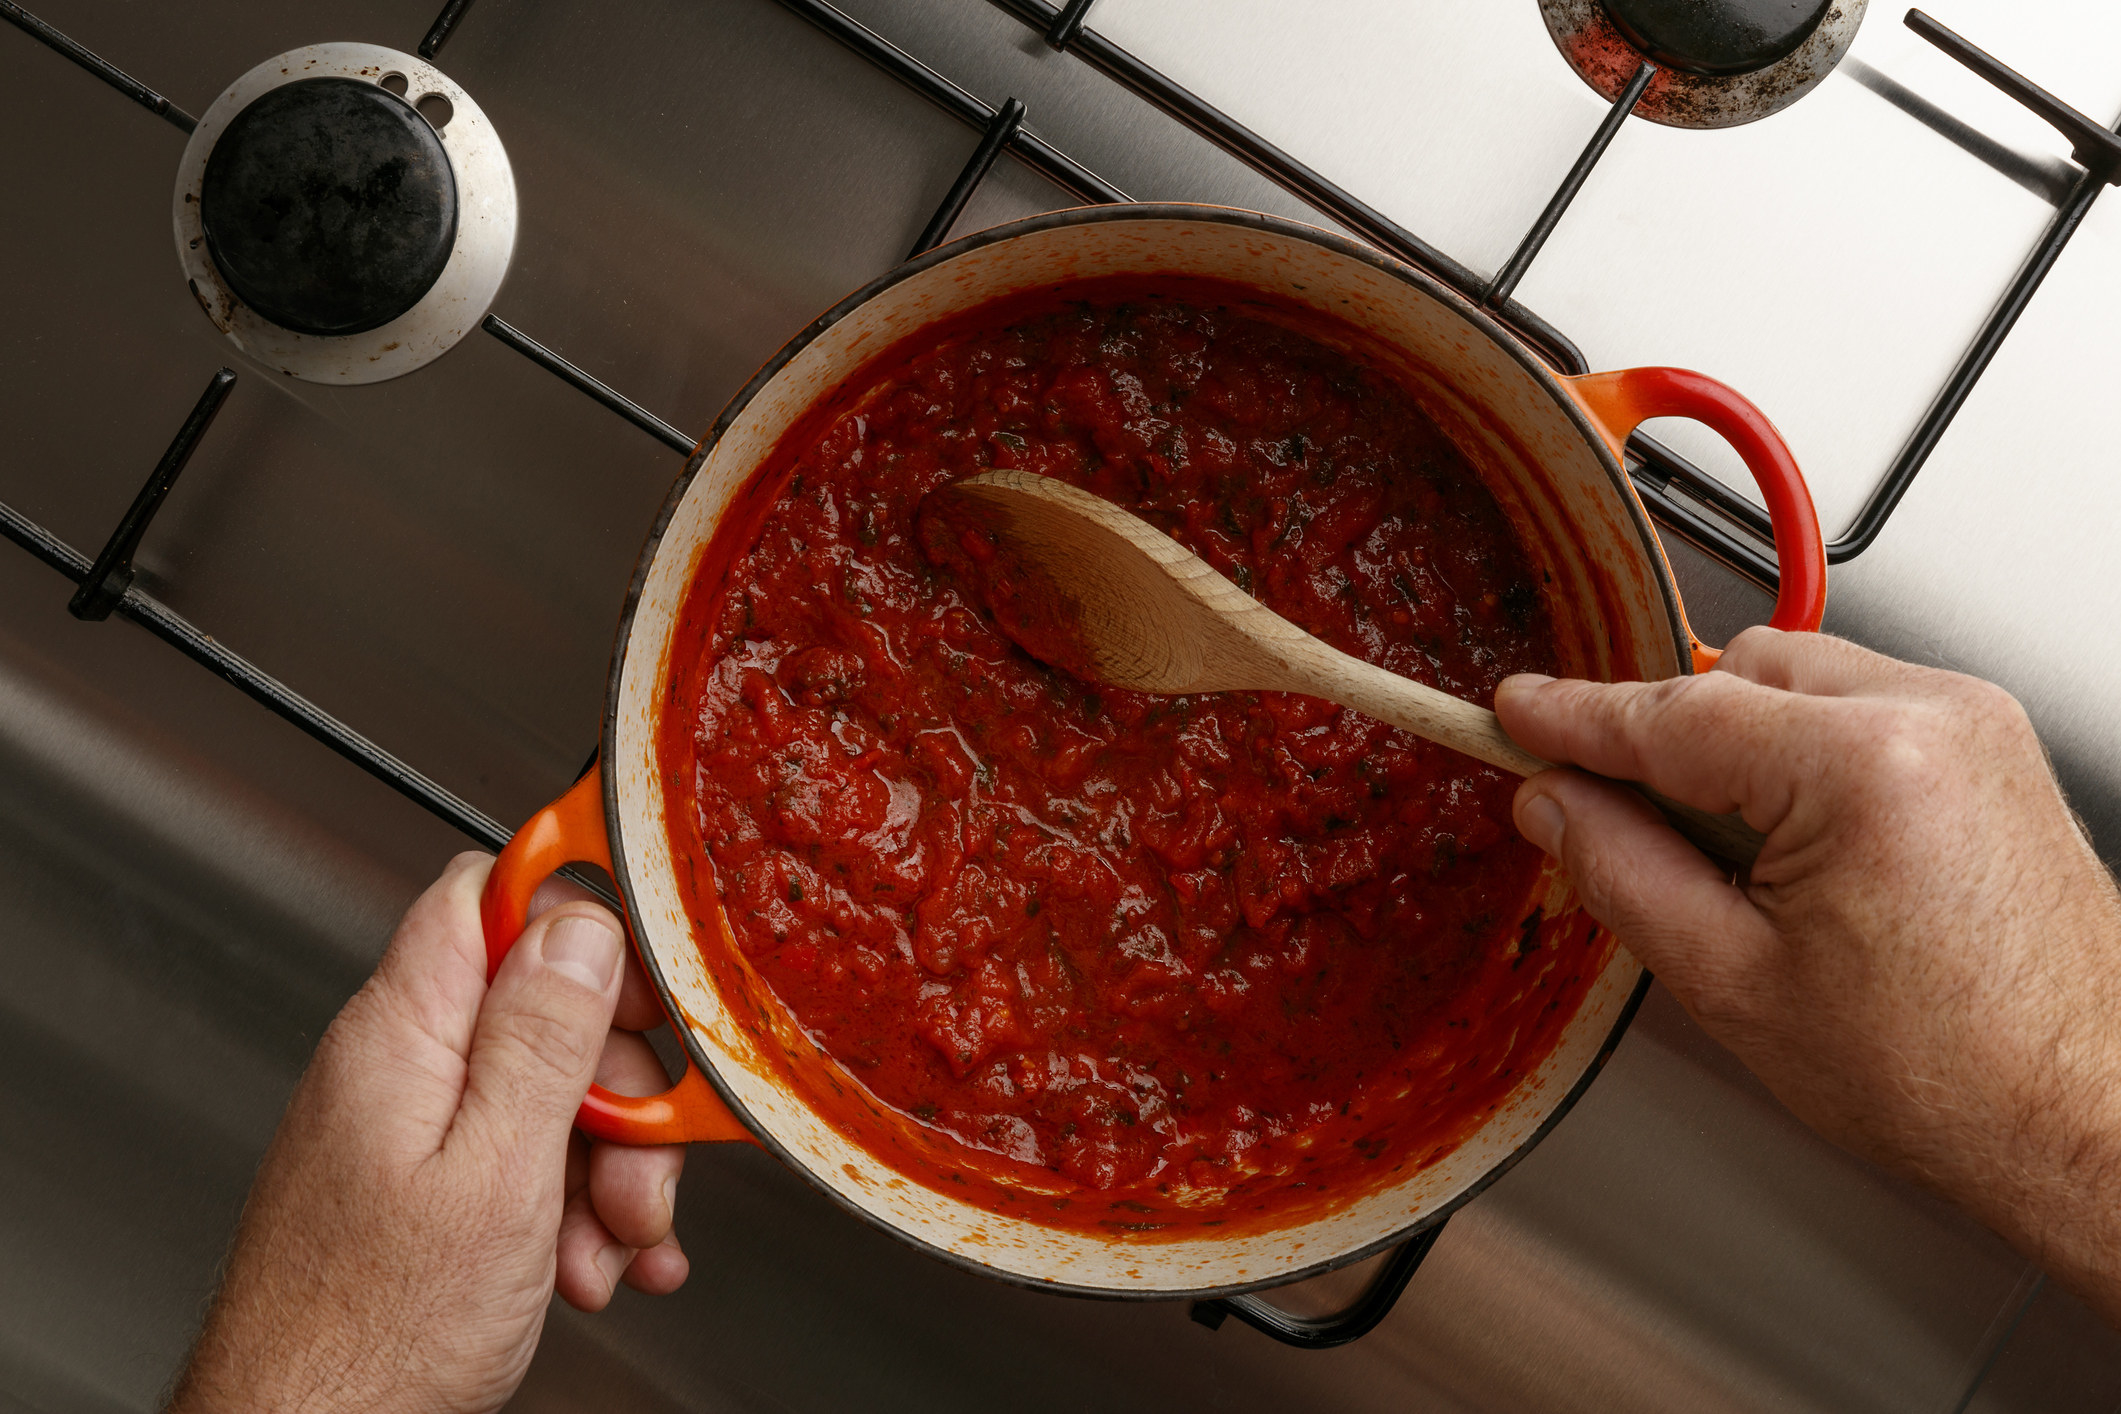 Cooking tomato sauce in a Dutch oven.